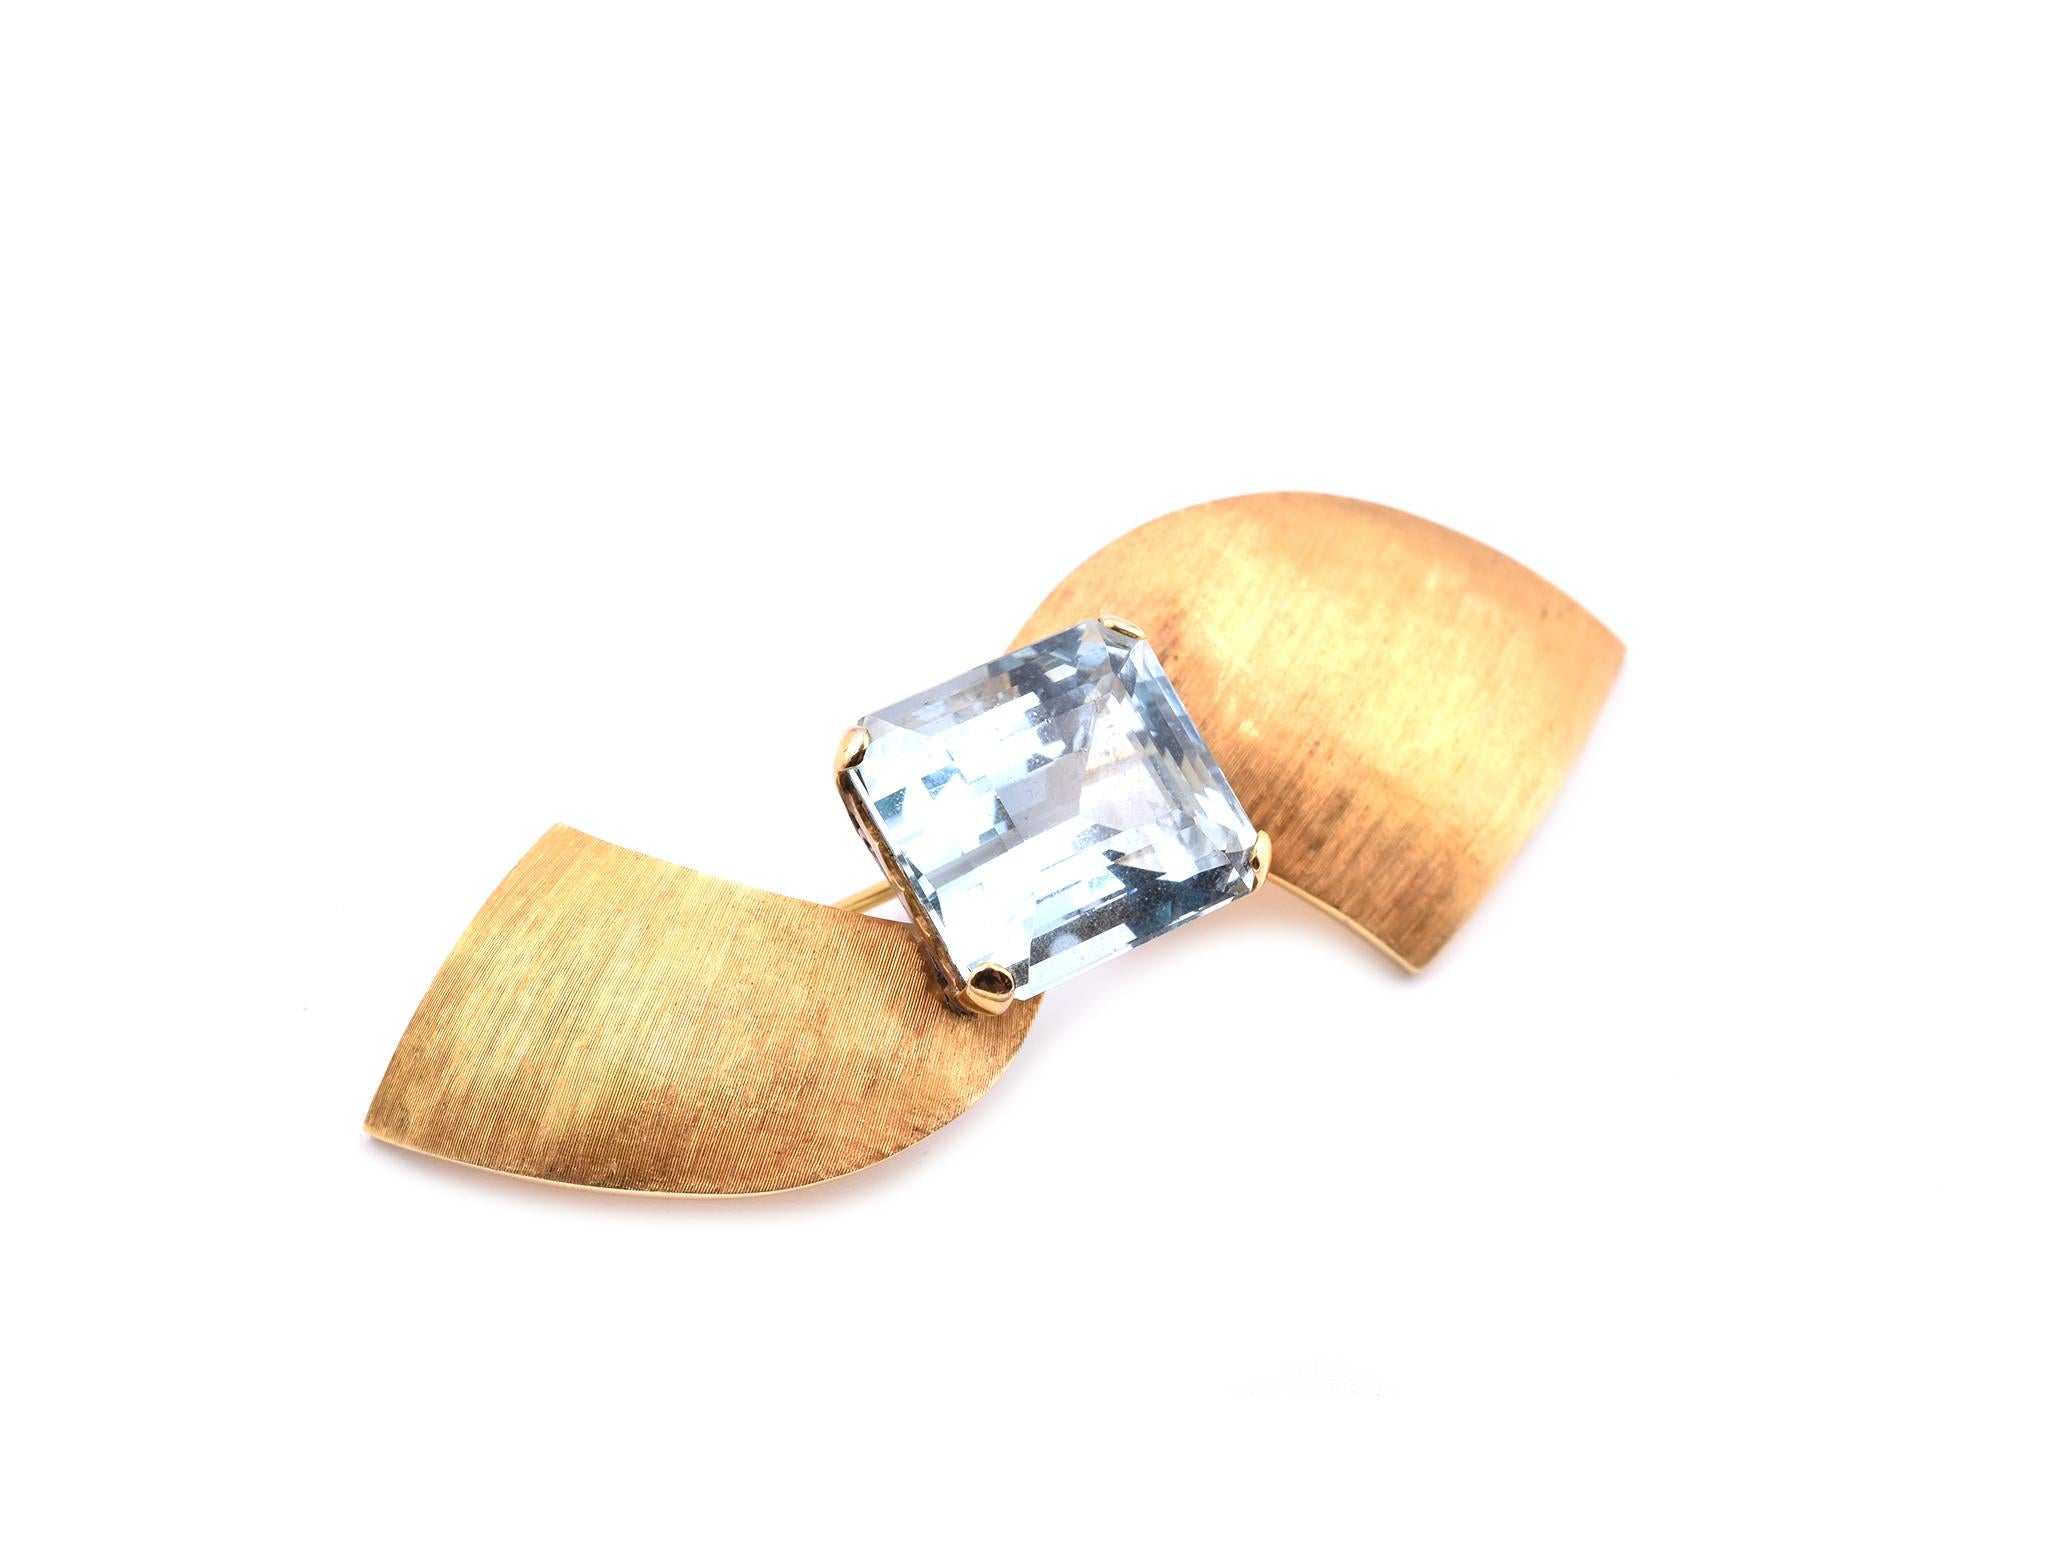 Designer: custom designed
Material: 18k yellow gold
Aquamarine: 1 emerald cut= 15.50ct
Dimensions: pin is 2 ½-iches long and it is 24mm wide
Weight: 11.93 grams
